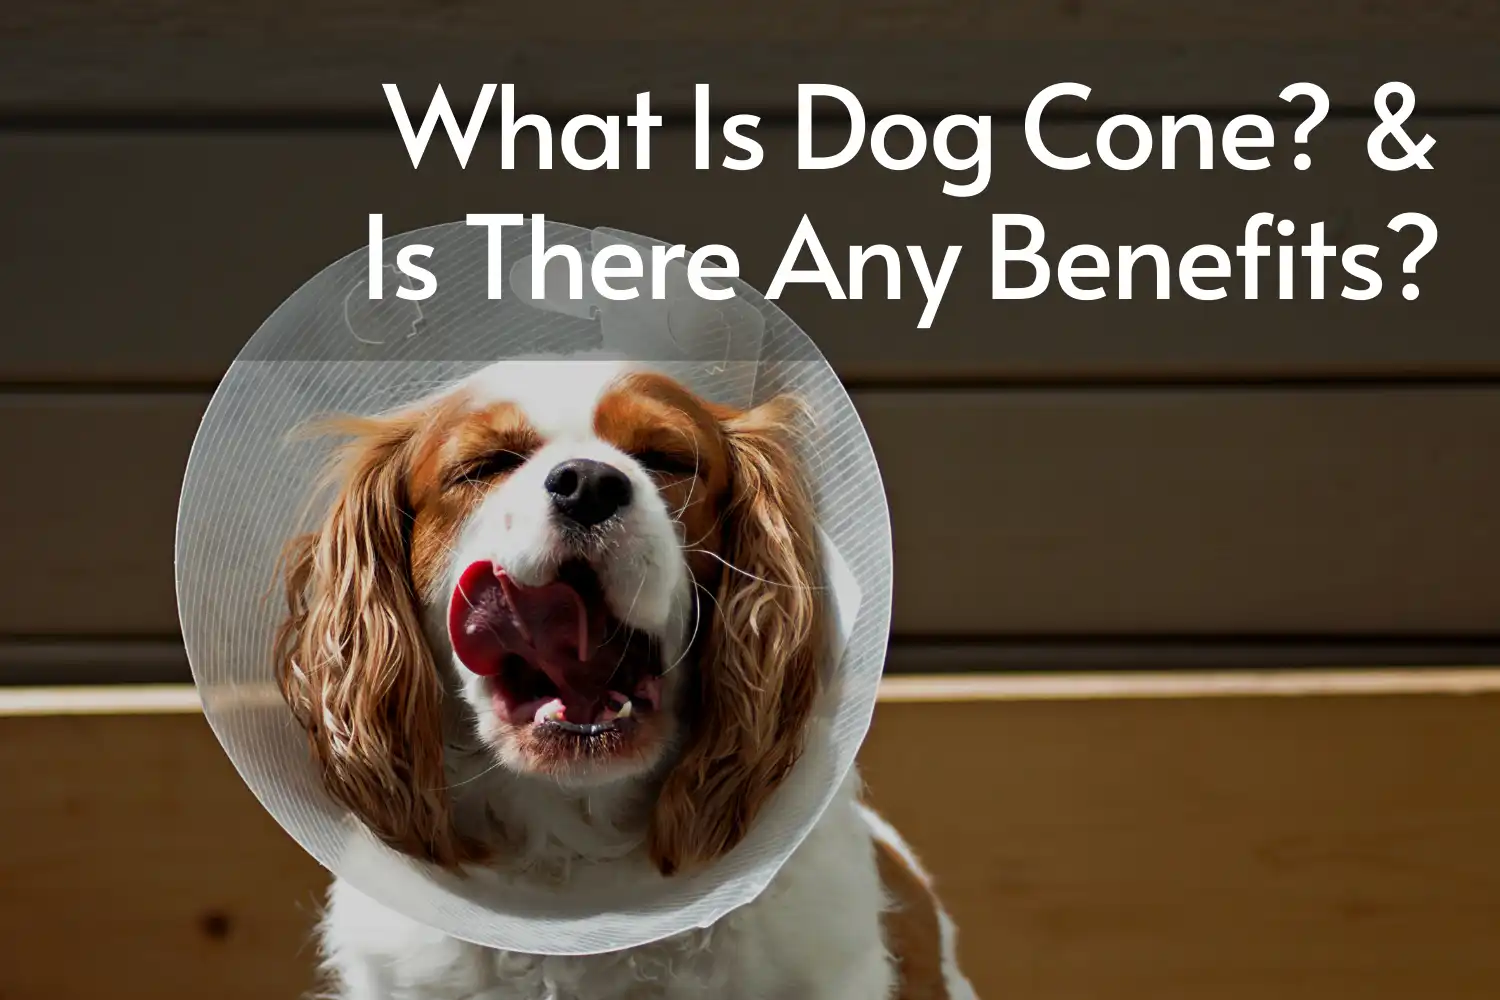 How Long Does Dog Wear Cone after Neuter? - What Is Dog Cone? & Is There Any Benefits?